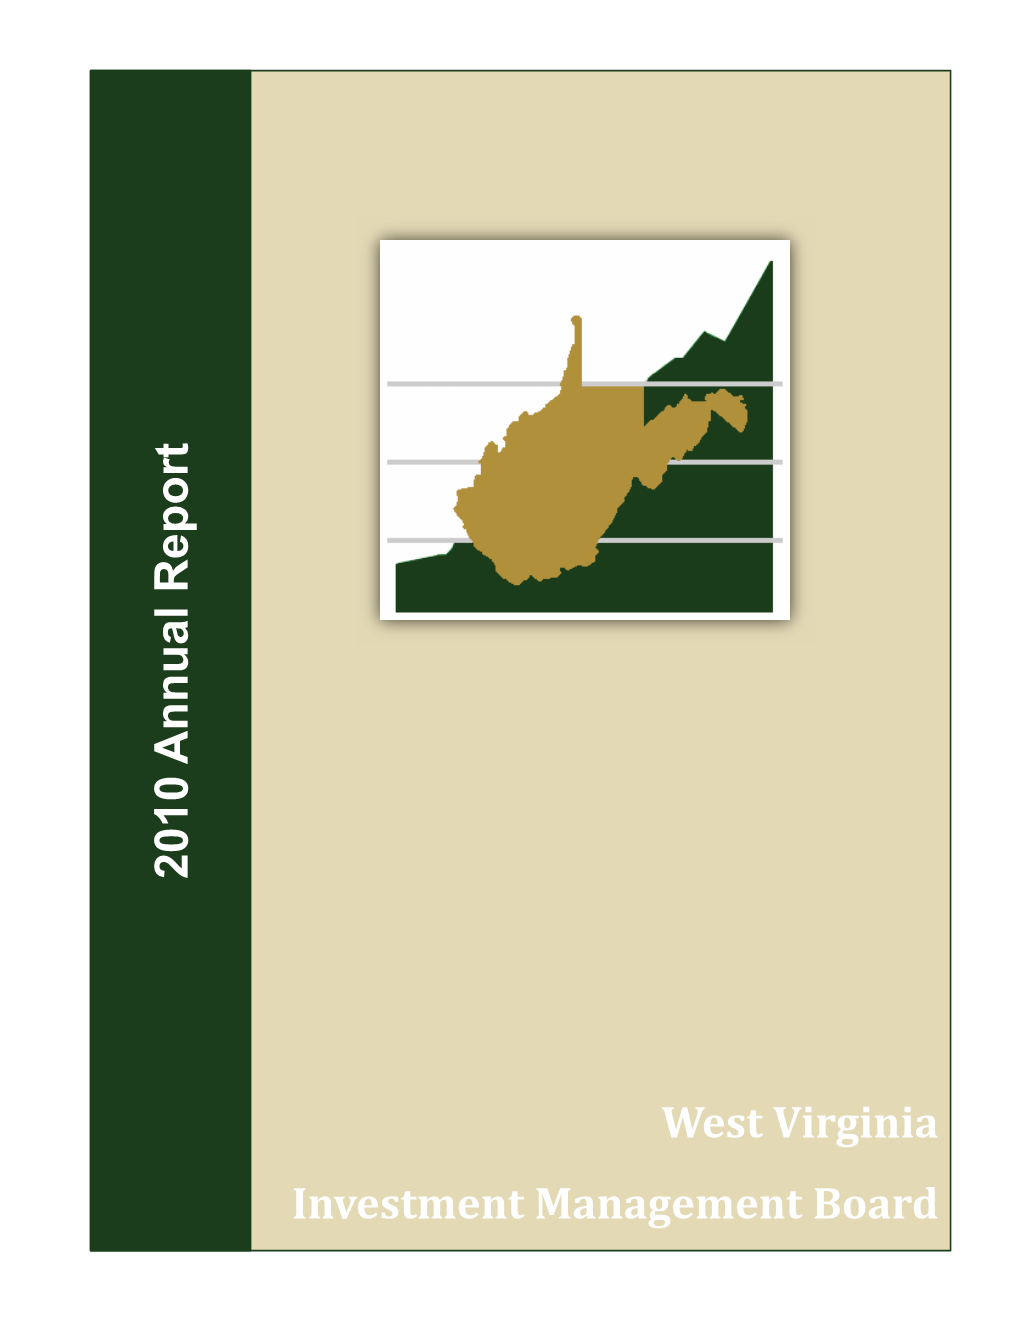 2010 Annual Report Investment Management Board West Virginia